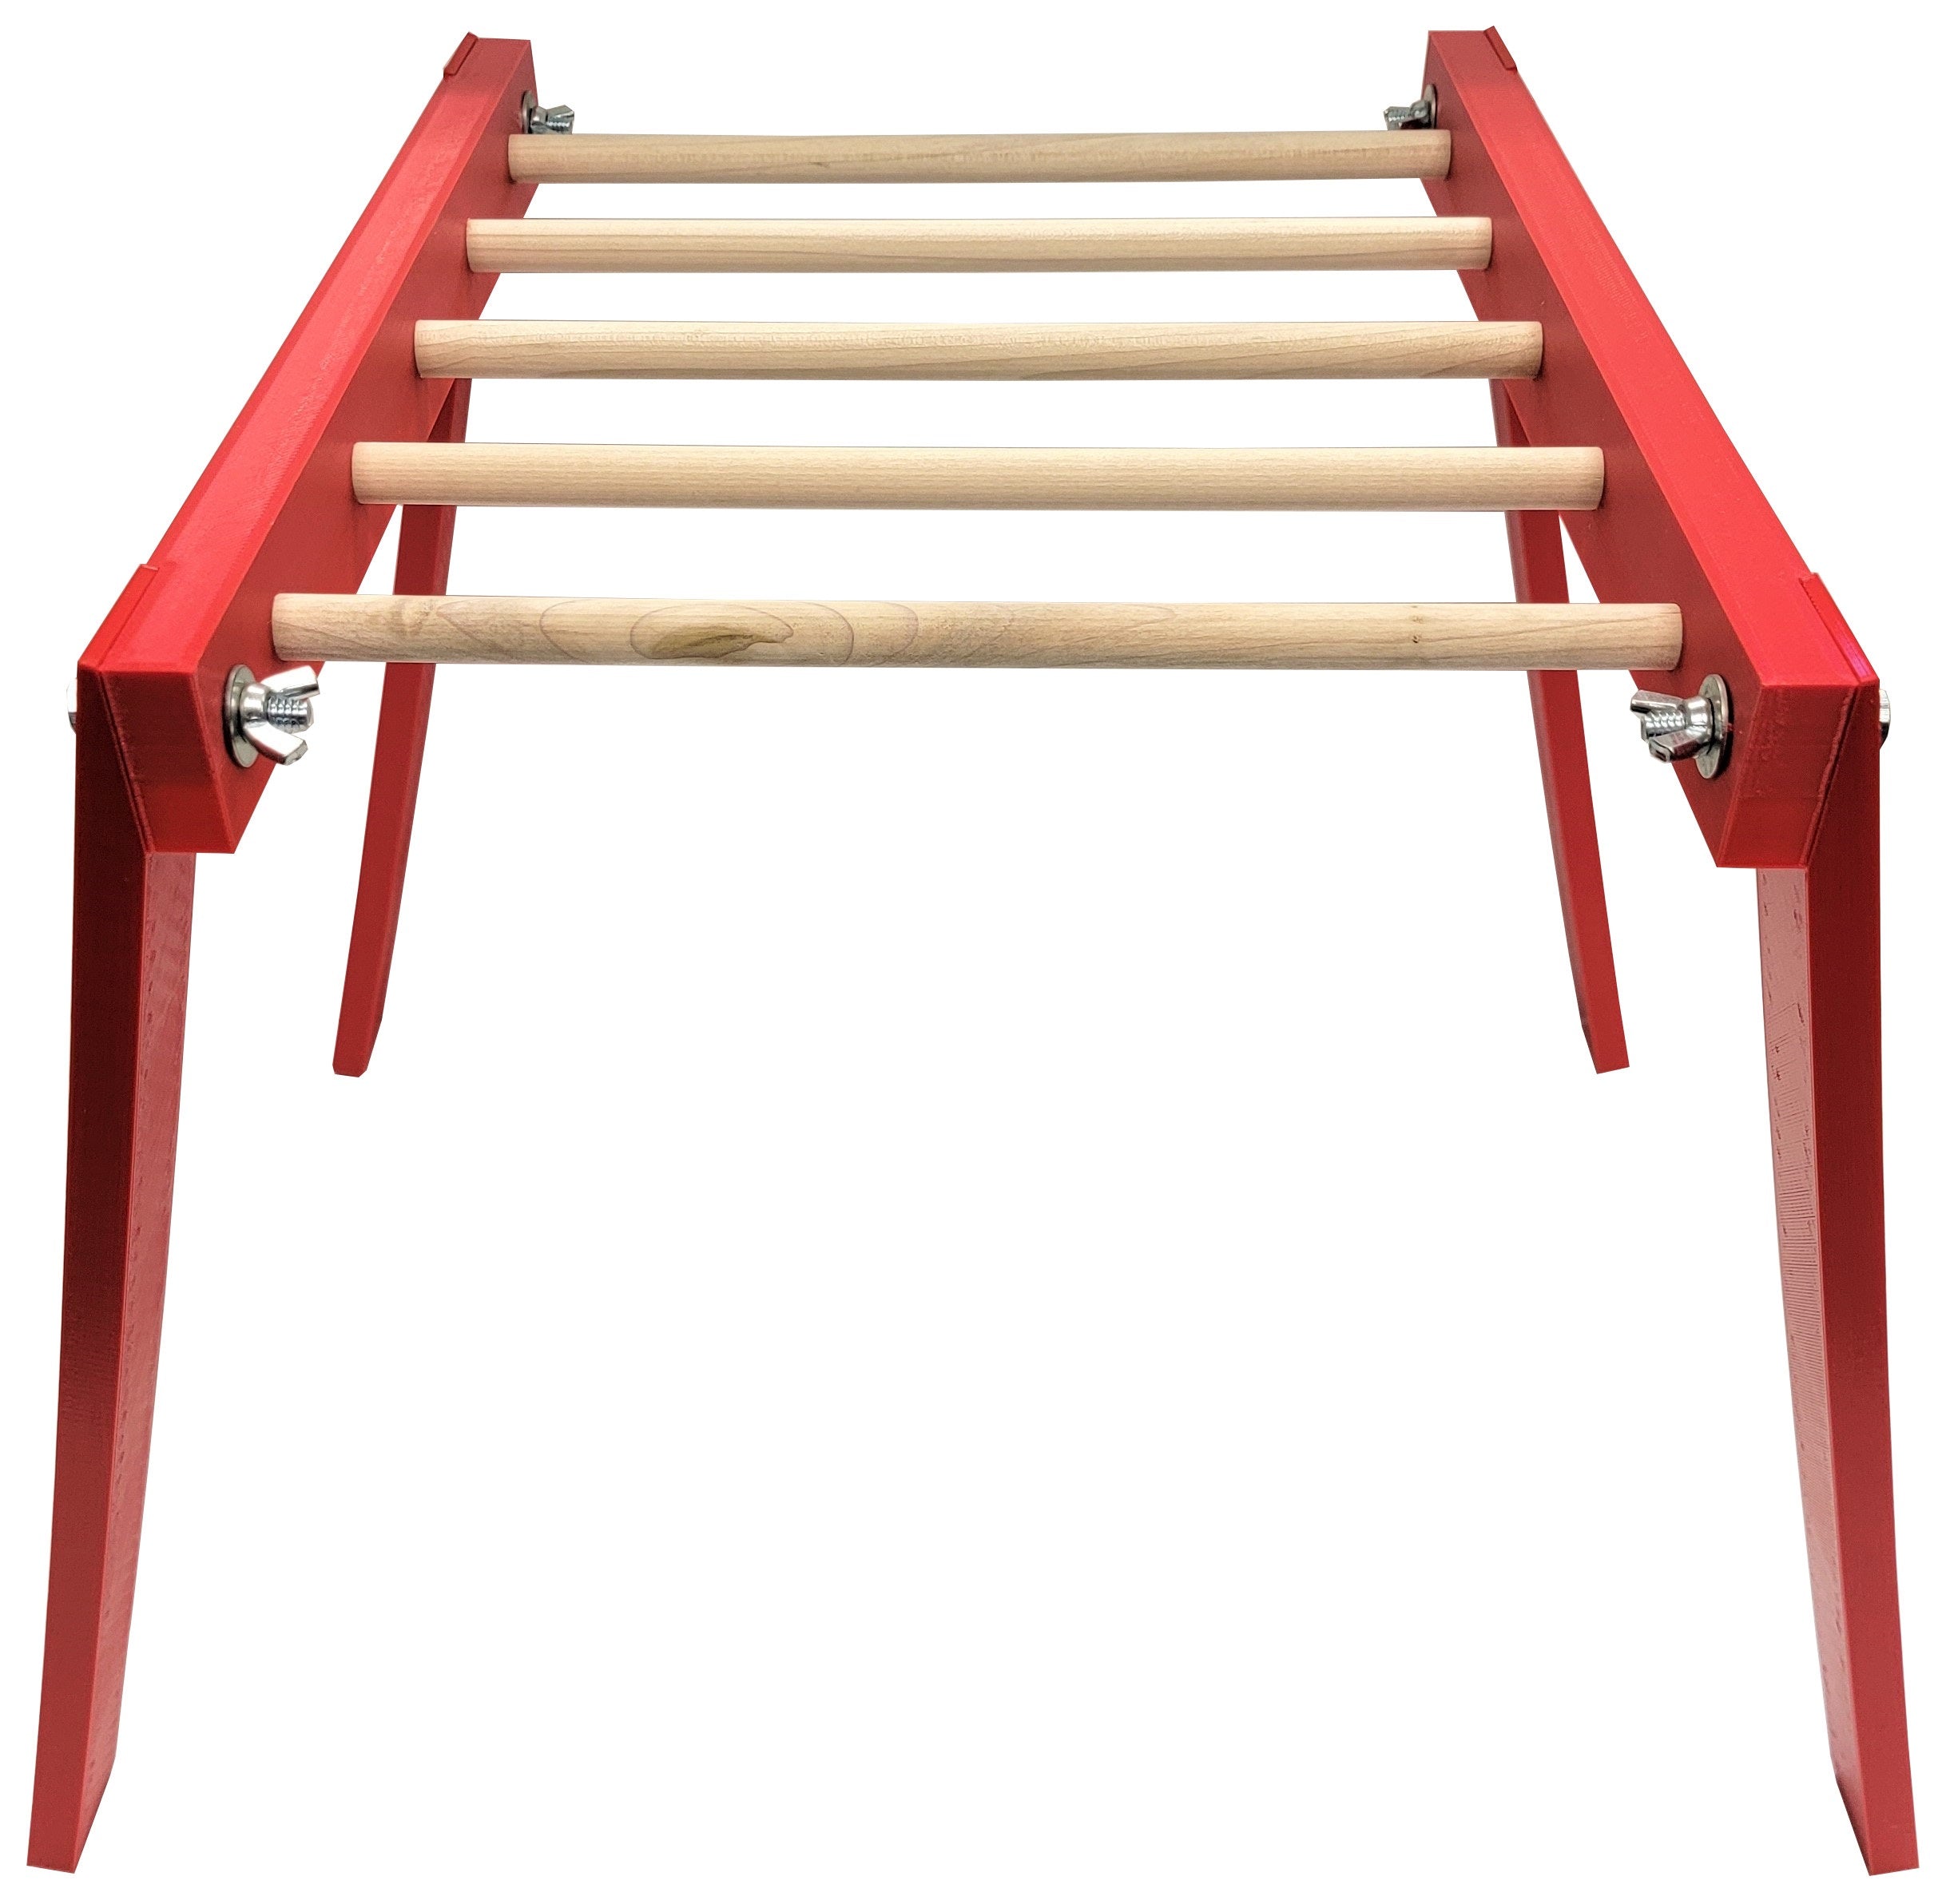 20.5 Inch Long Red Chicken Monkey Bars Poultry Perch